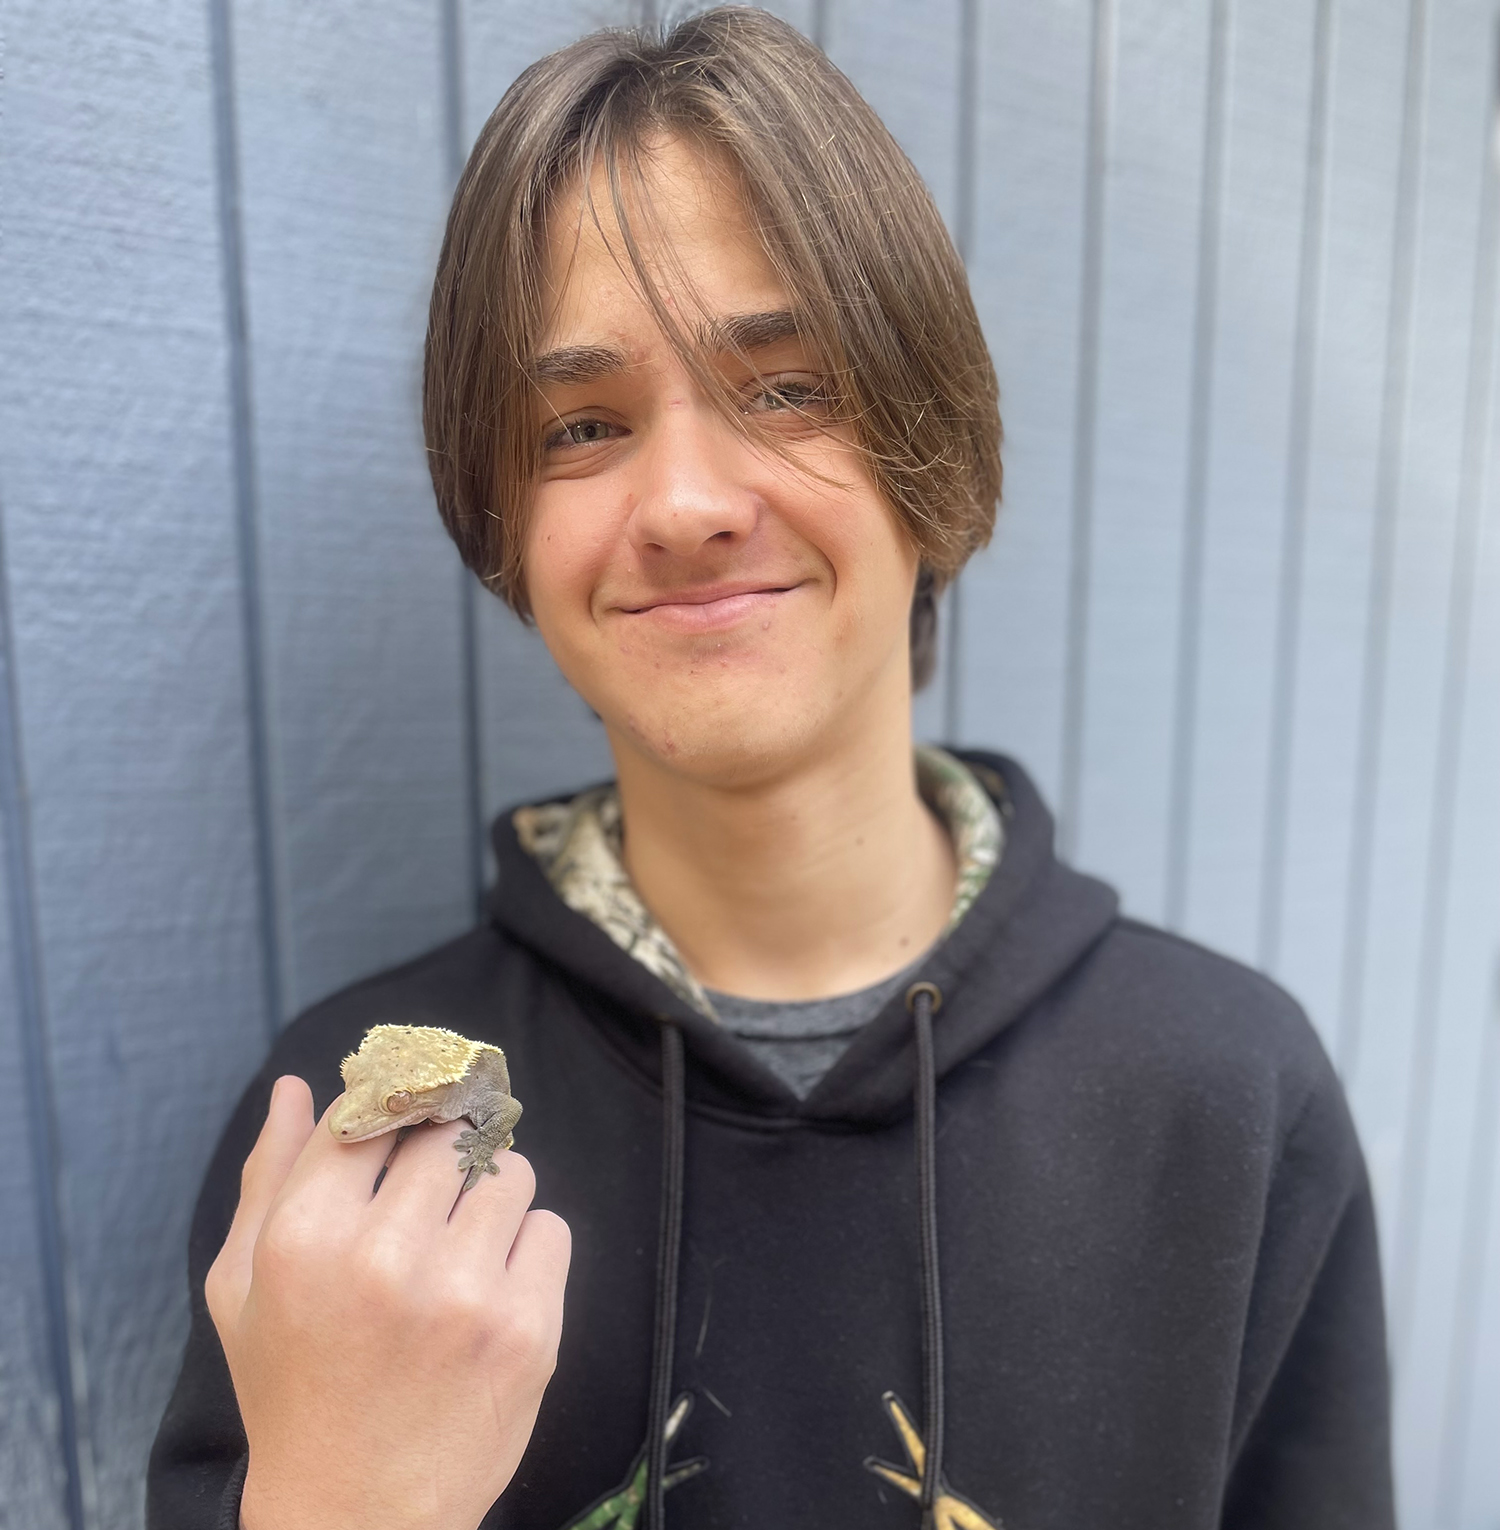 Jack, Jessica Spears' 15-year old son, and his bearded dragon are pictured here